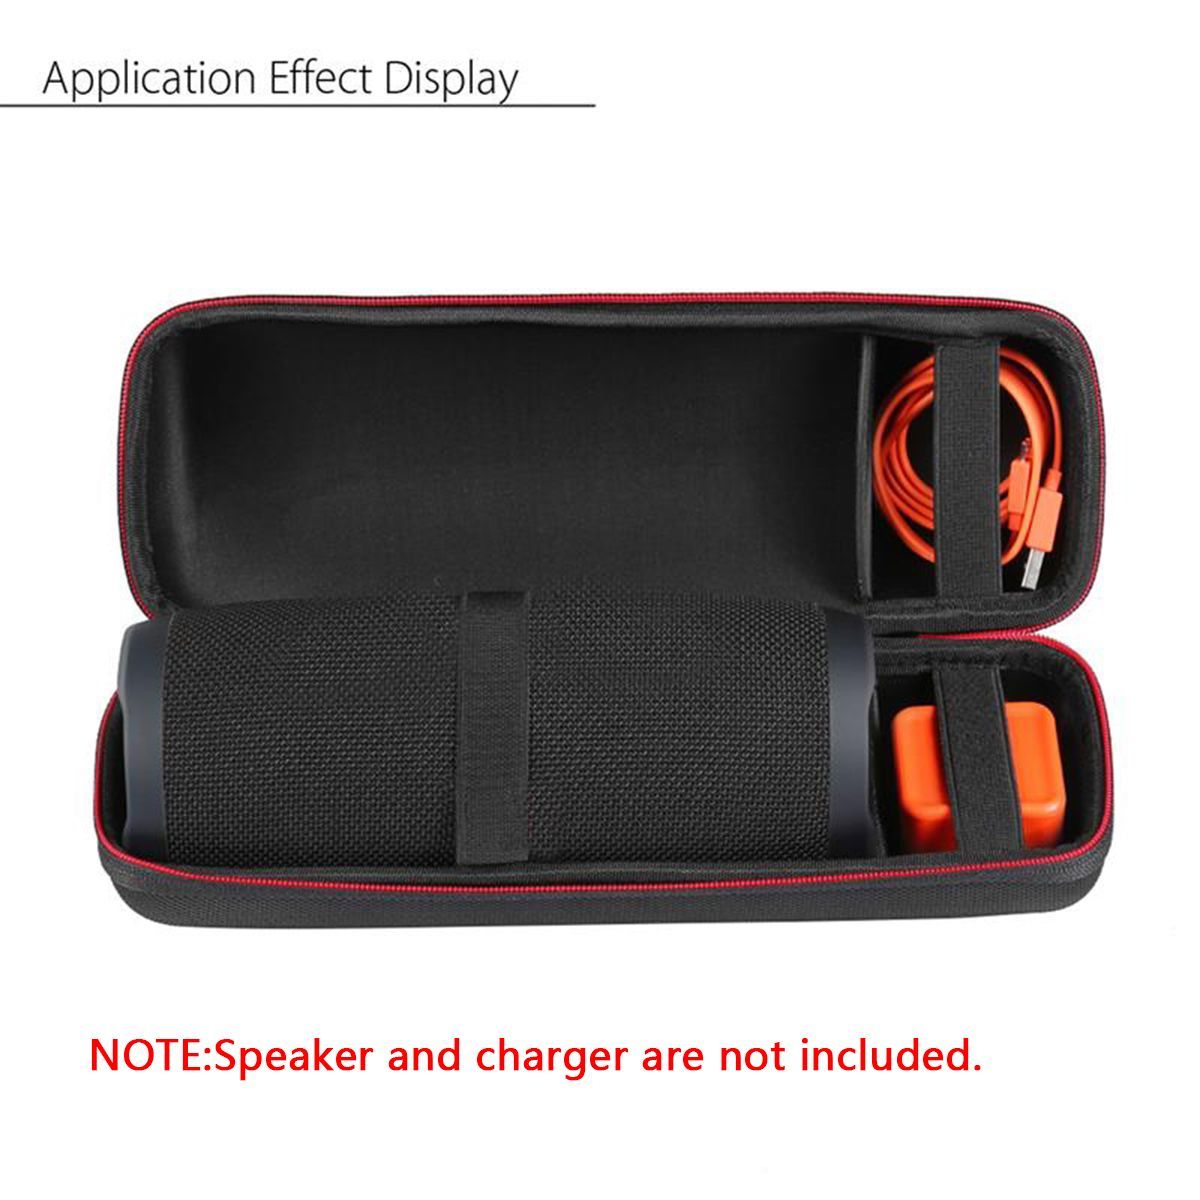 Portable-EVA-Hard-Carry-Bag-Box-Protective-Cover-Case-For-JBL-Charge-3-bluetooth-Speaker-Pouch-Case-1411939